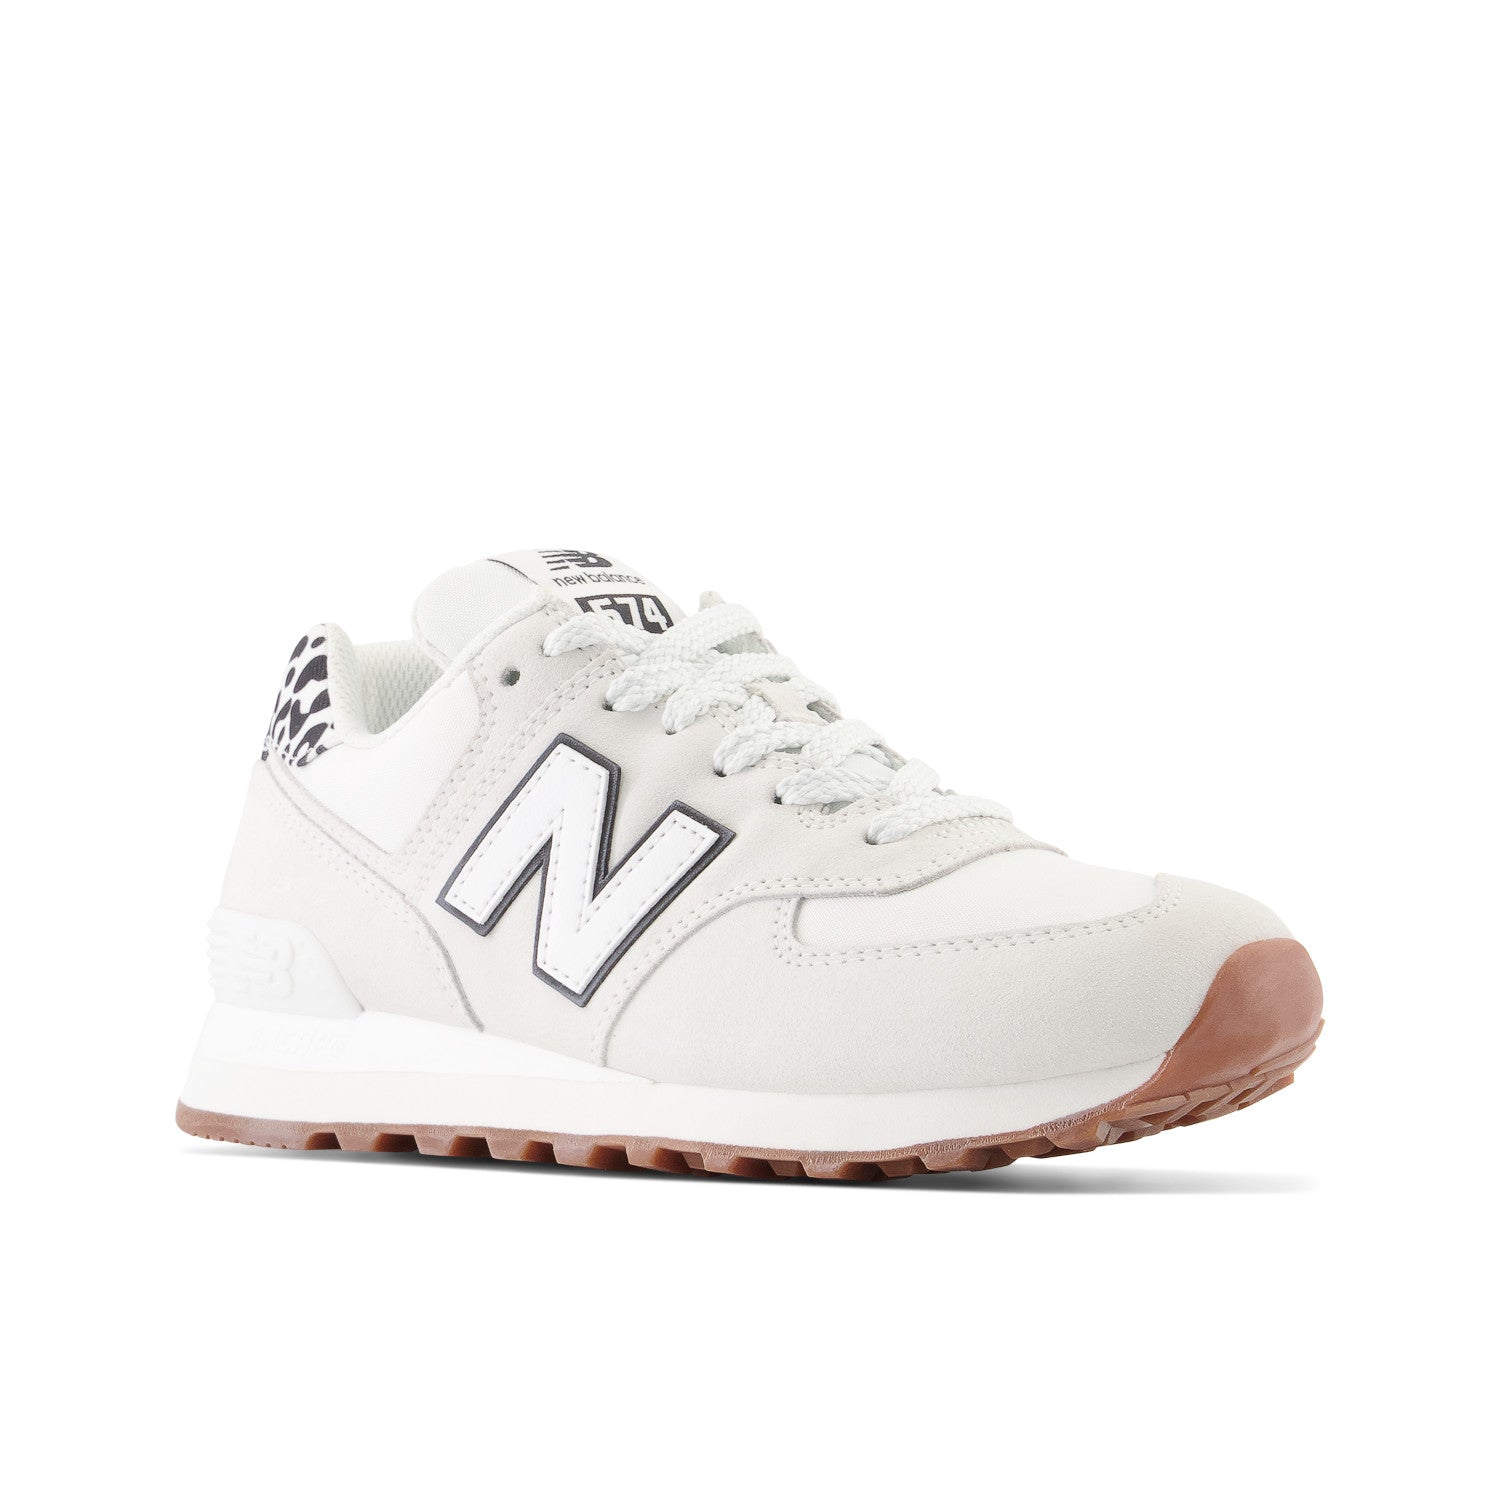 Women's New Balance 574 Color: Reflection